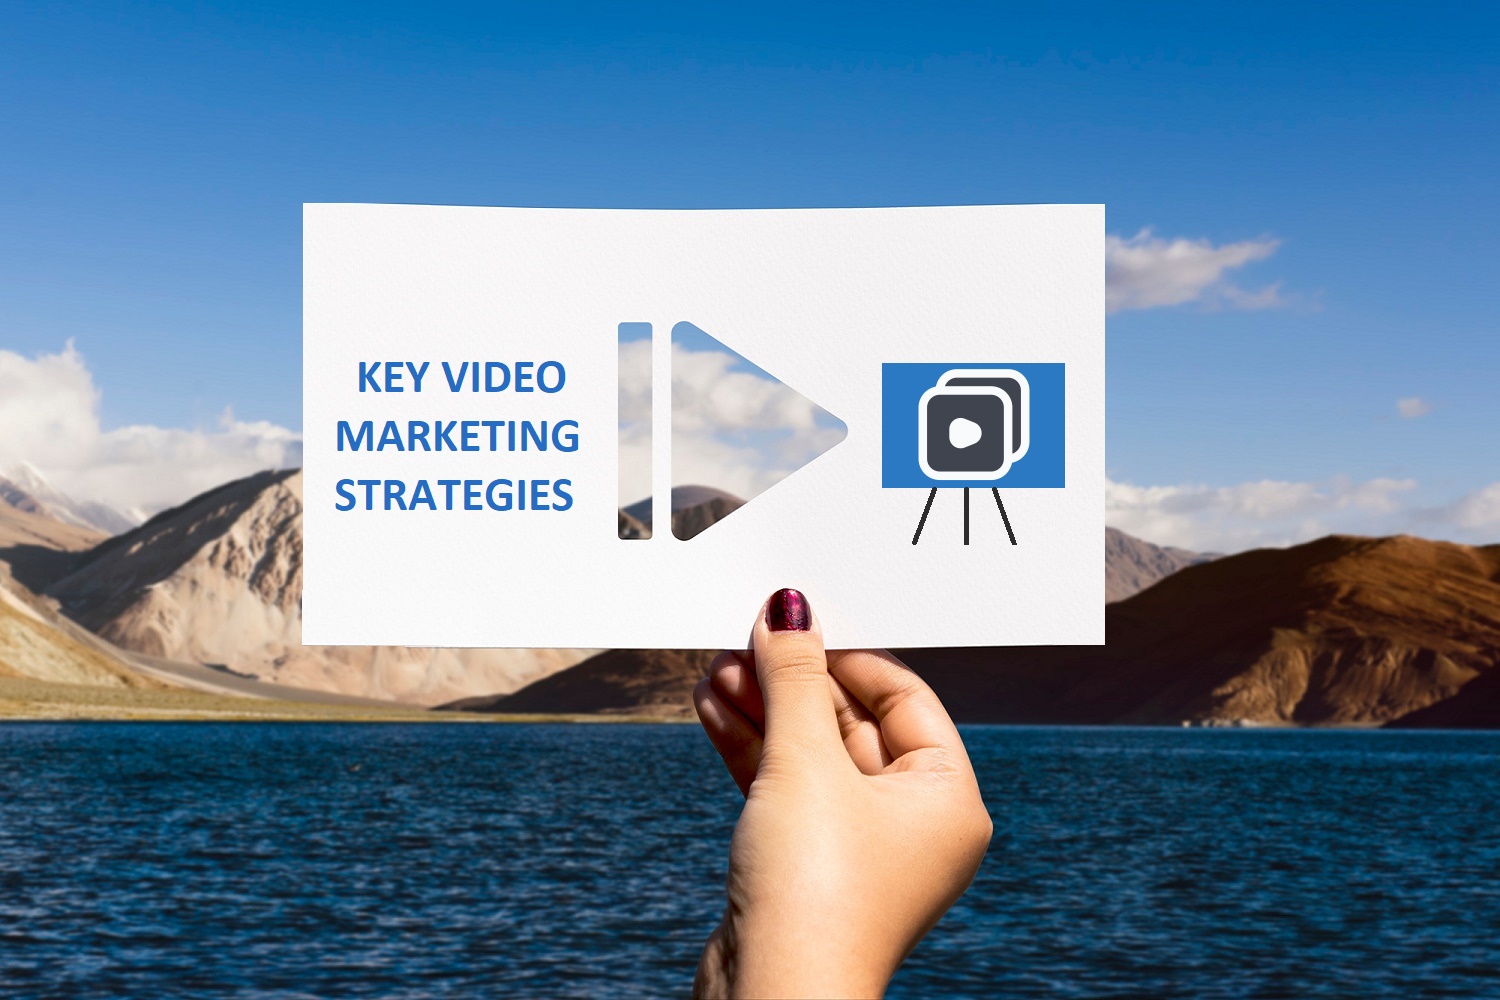 Five video marketing avenues to grow your business and brand awareness.